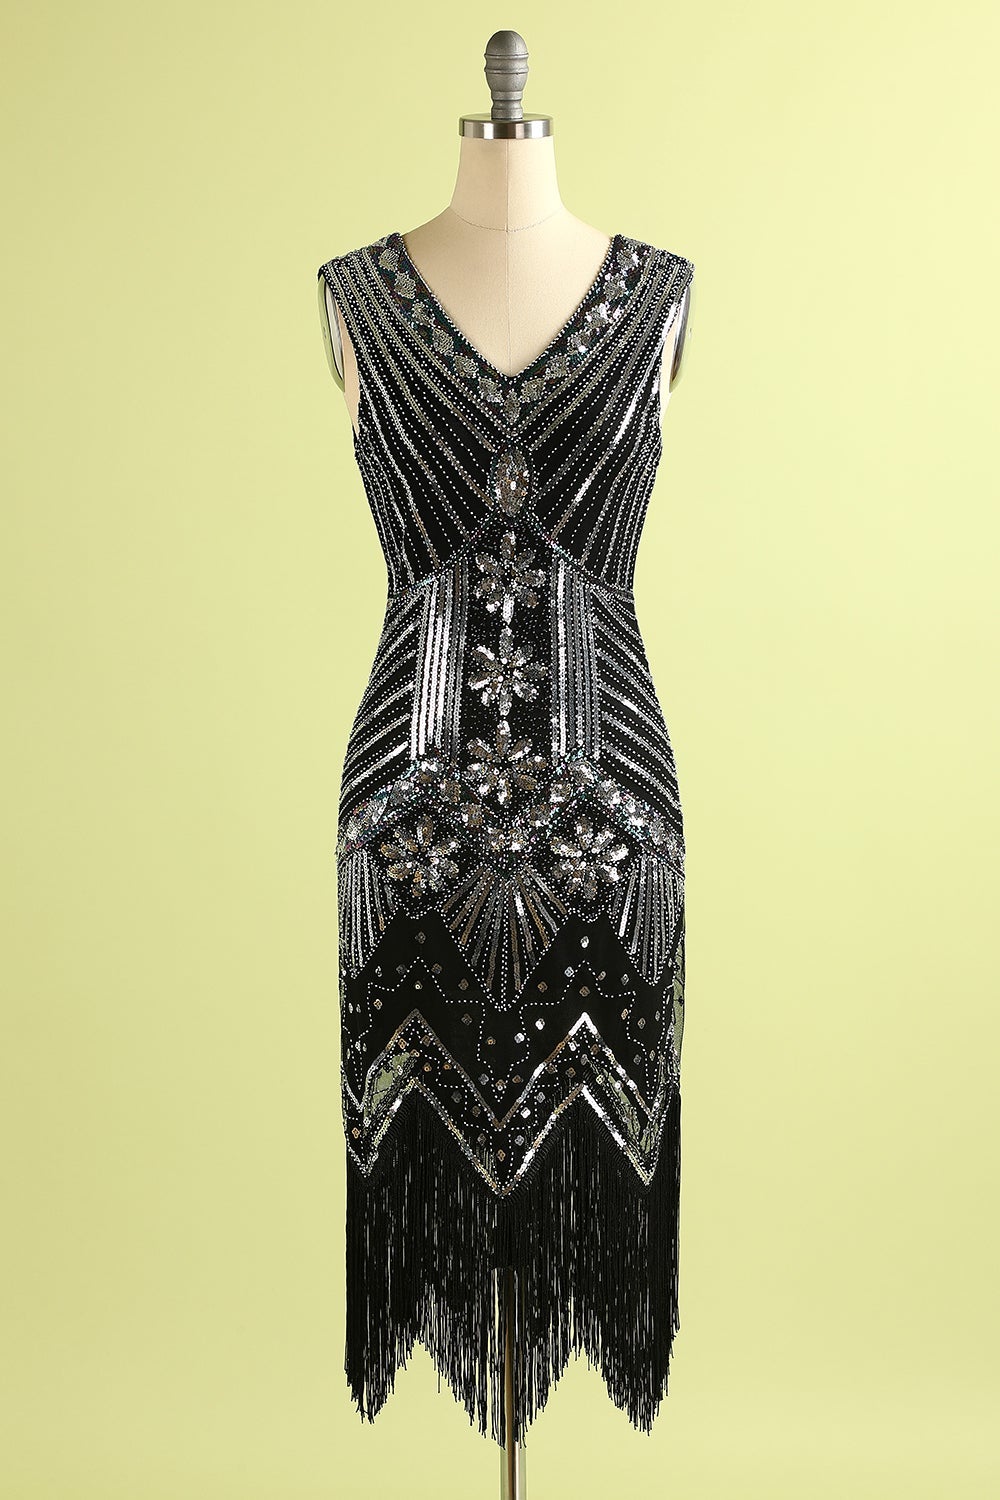 Black and Silver Sequin 1920s Dress